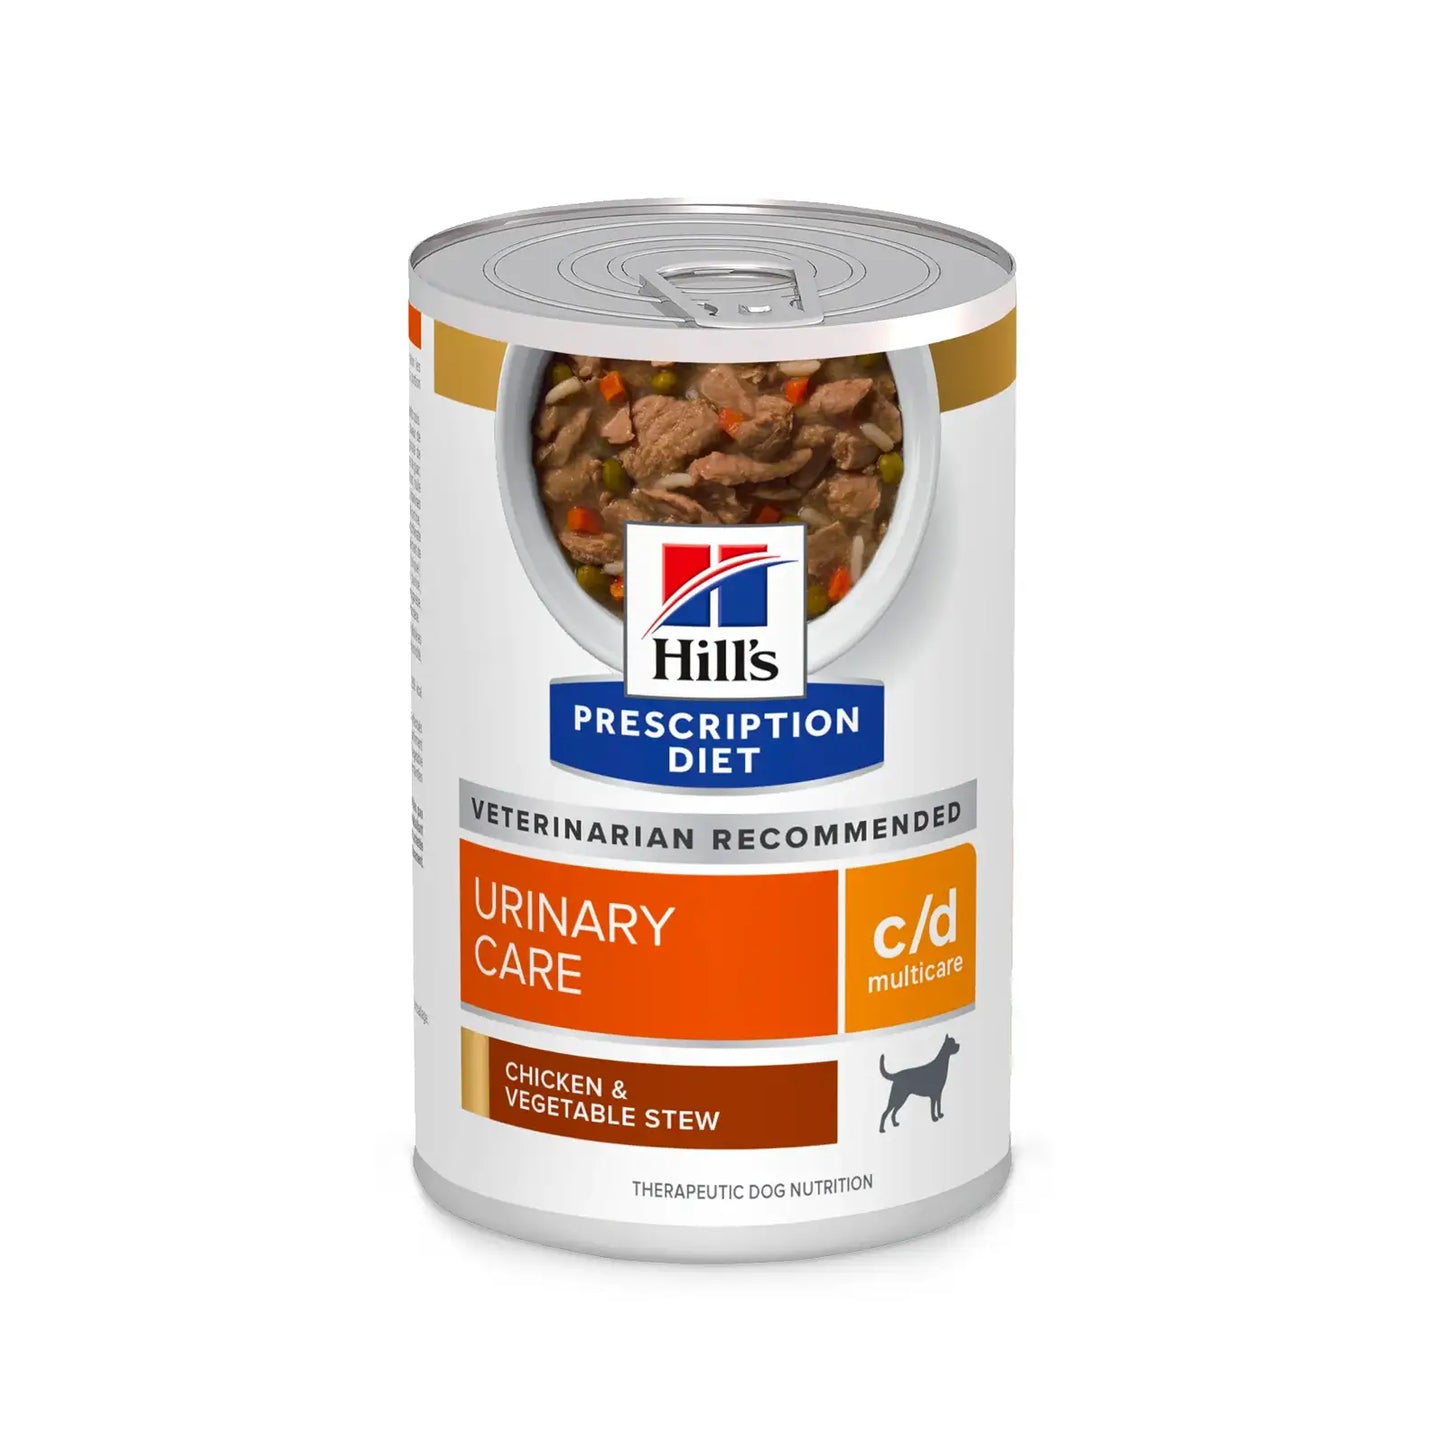 Hill's Prescription Diet - Canine C/D Urinary Care Chicken & Vegetable Stew